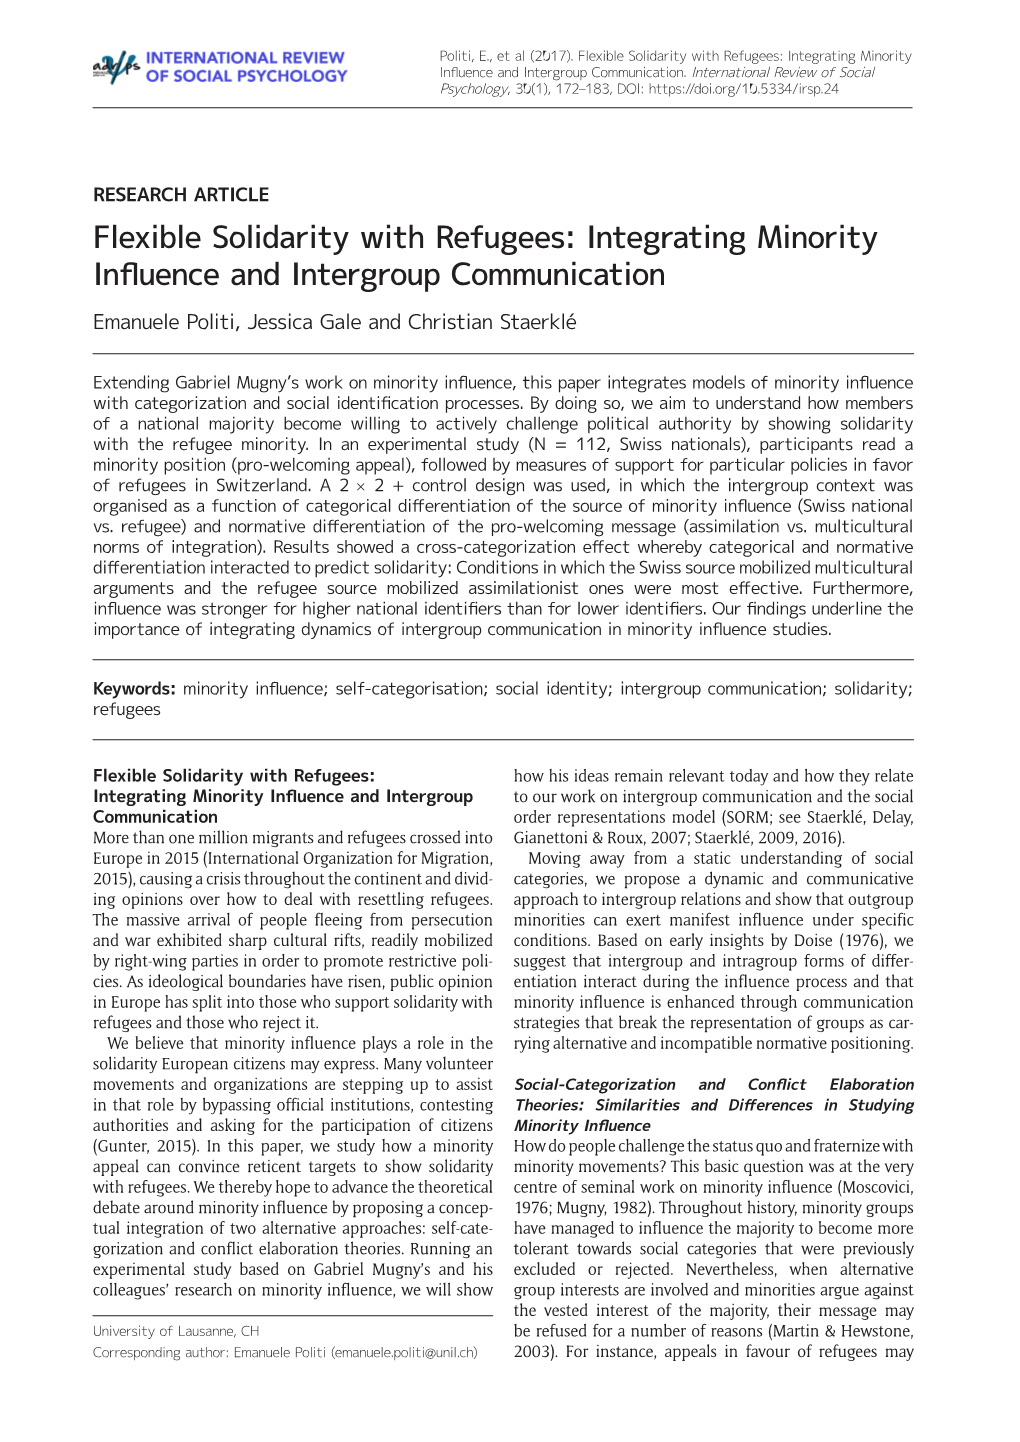 Flexible Solidarity with Refugees: Integrating Minority Influence And